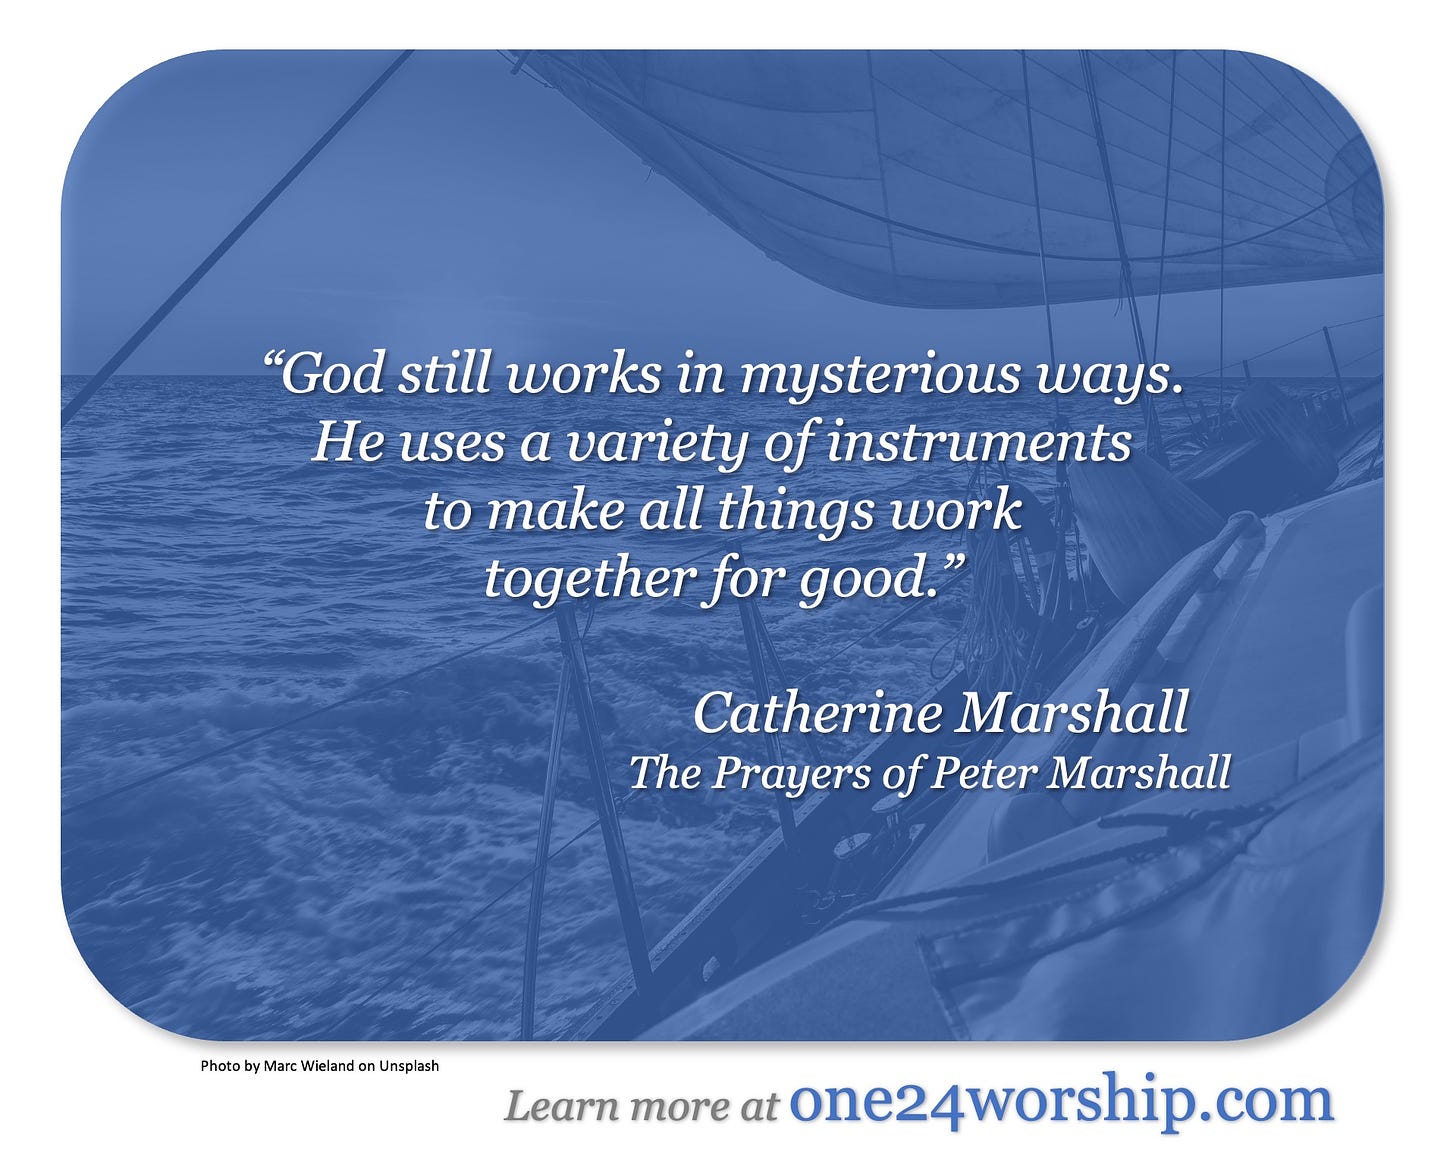 Image of the deck of a sailboat with the ocean and sunrise just off the port bow with Catherine Marshall quote superimposed.